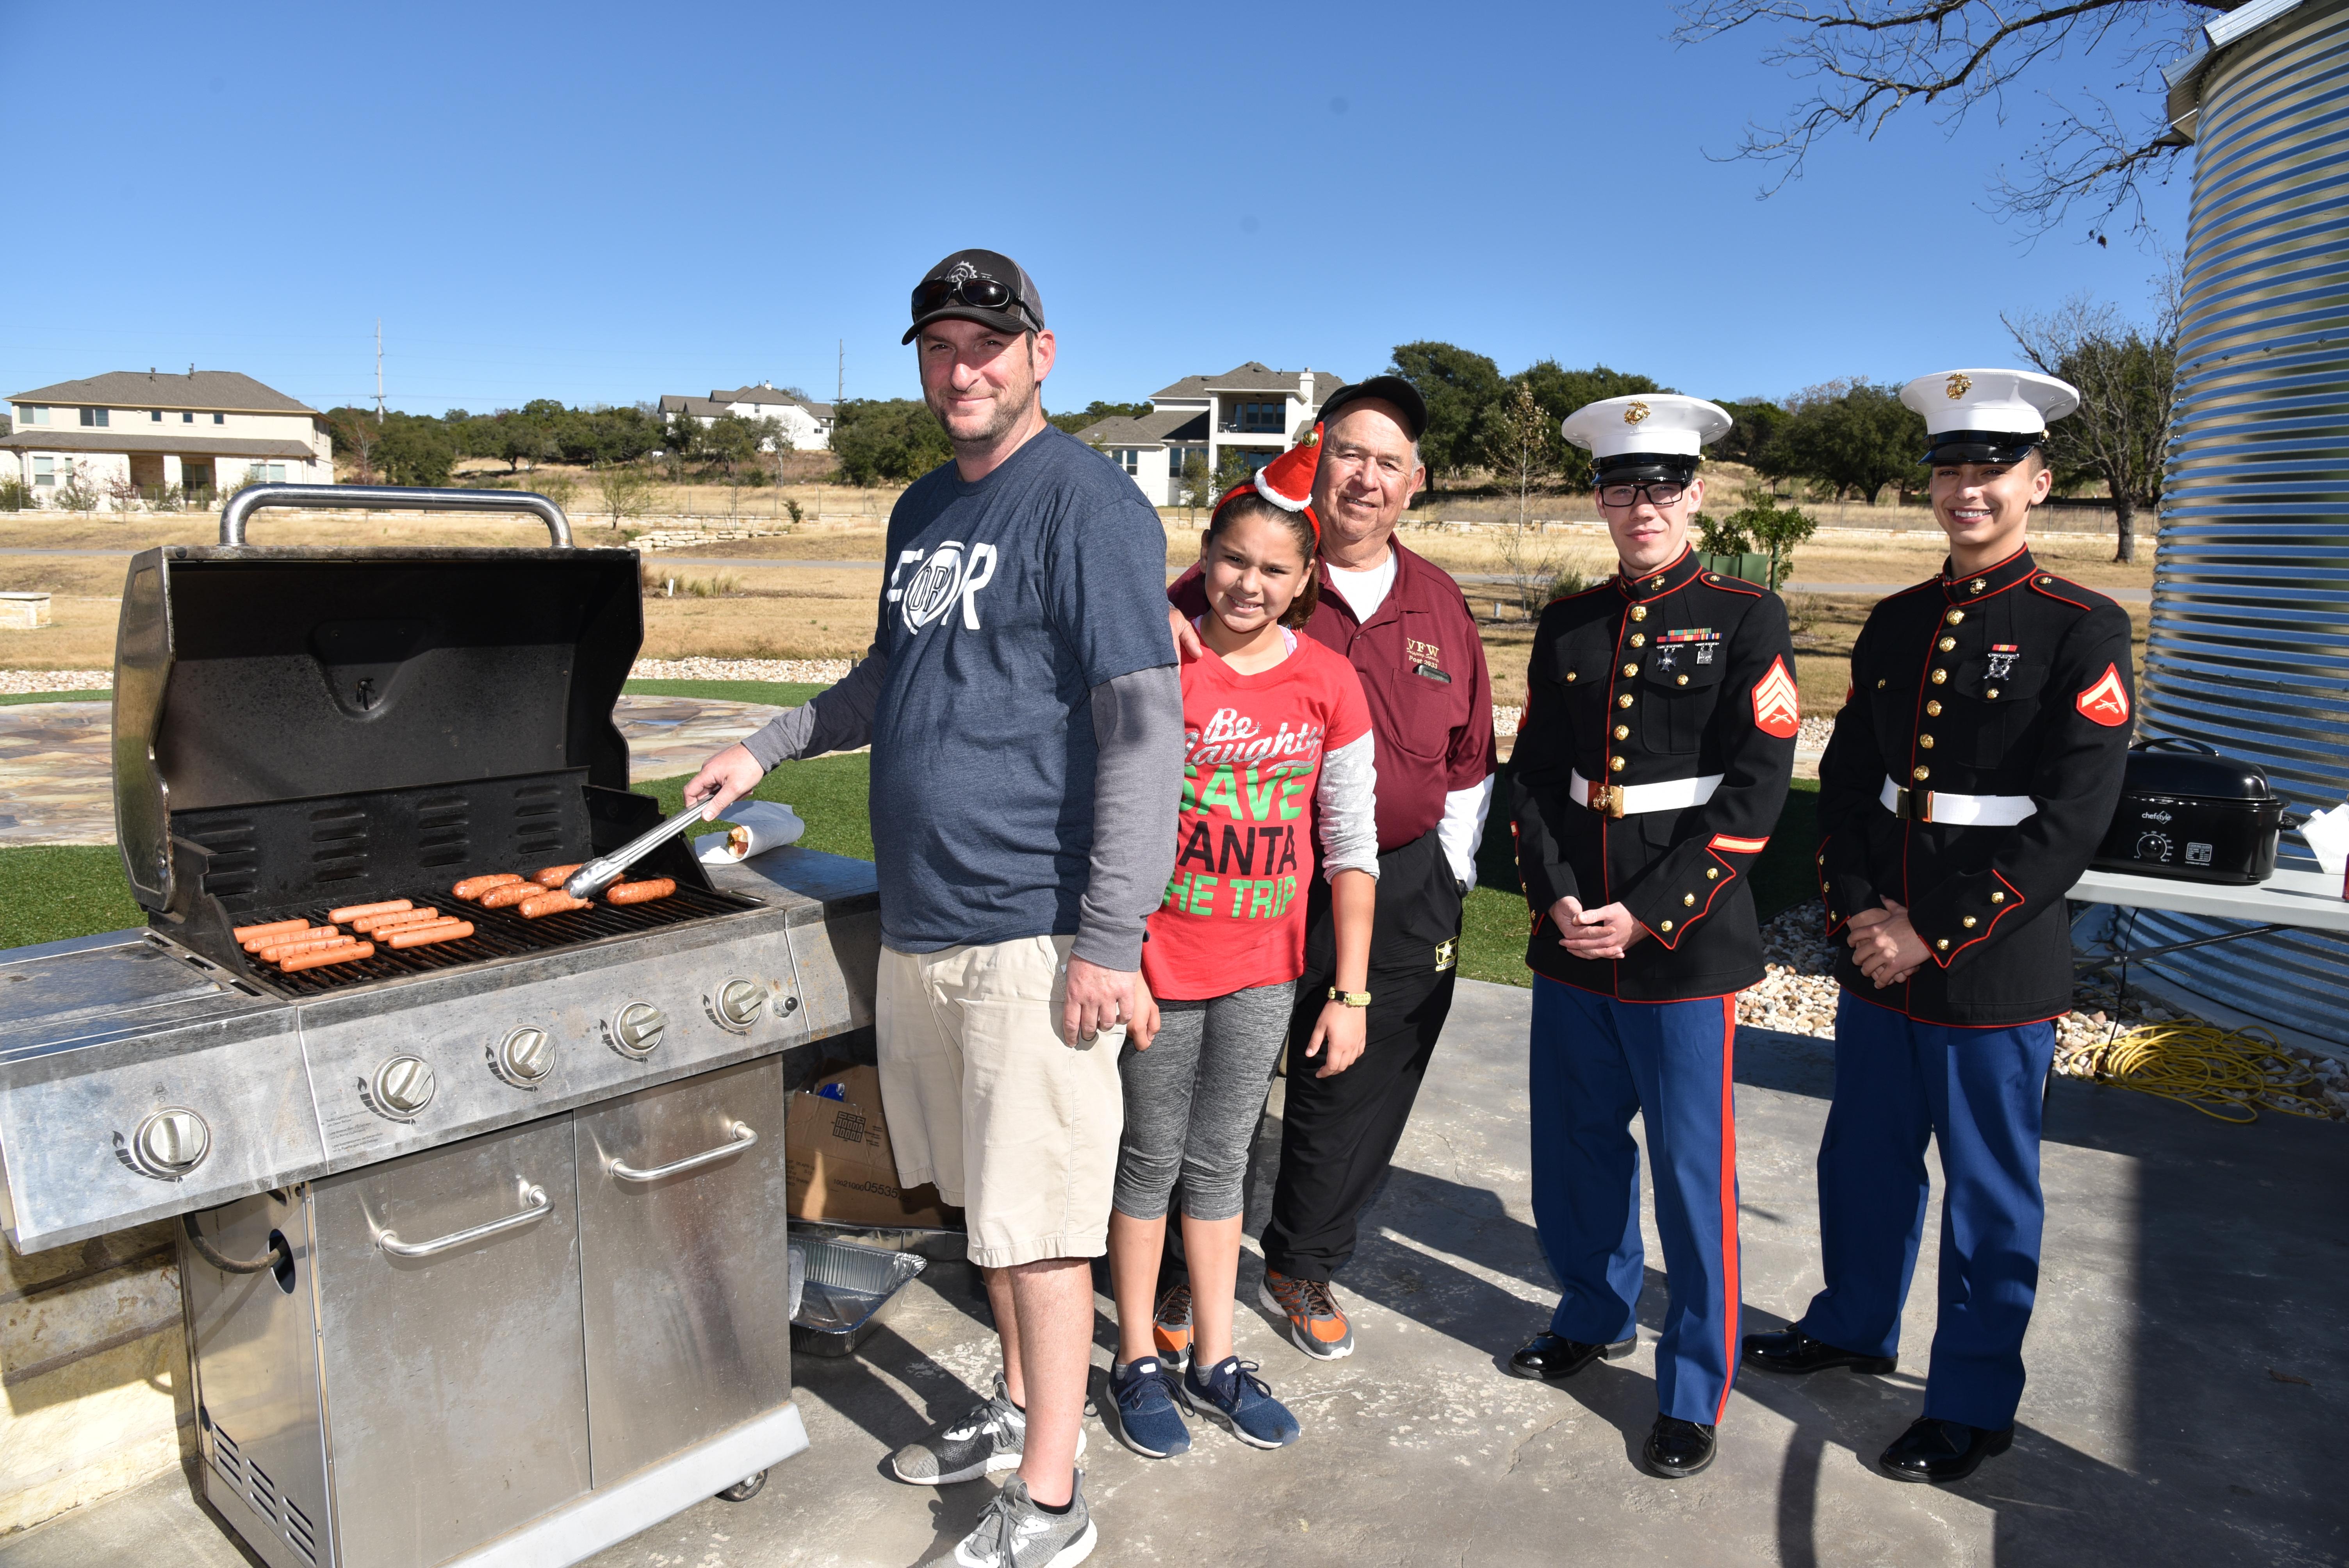 Marine Toys for Tots comes to town on Saturday Dripping Springs